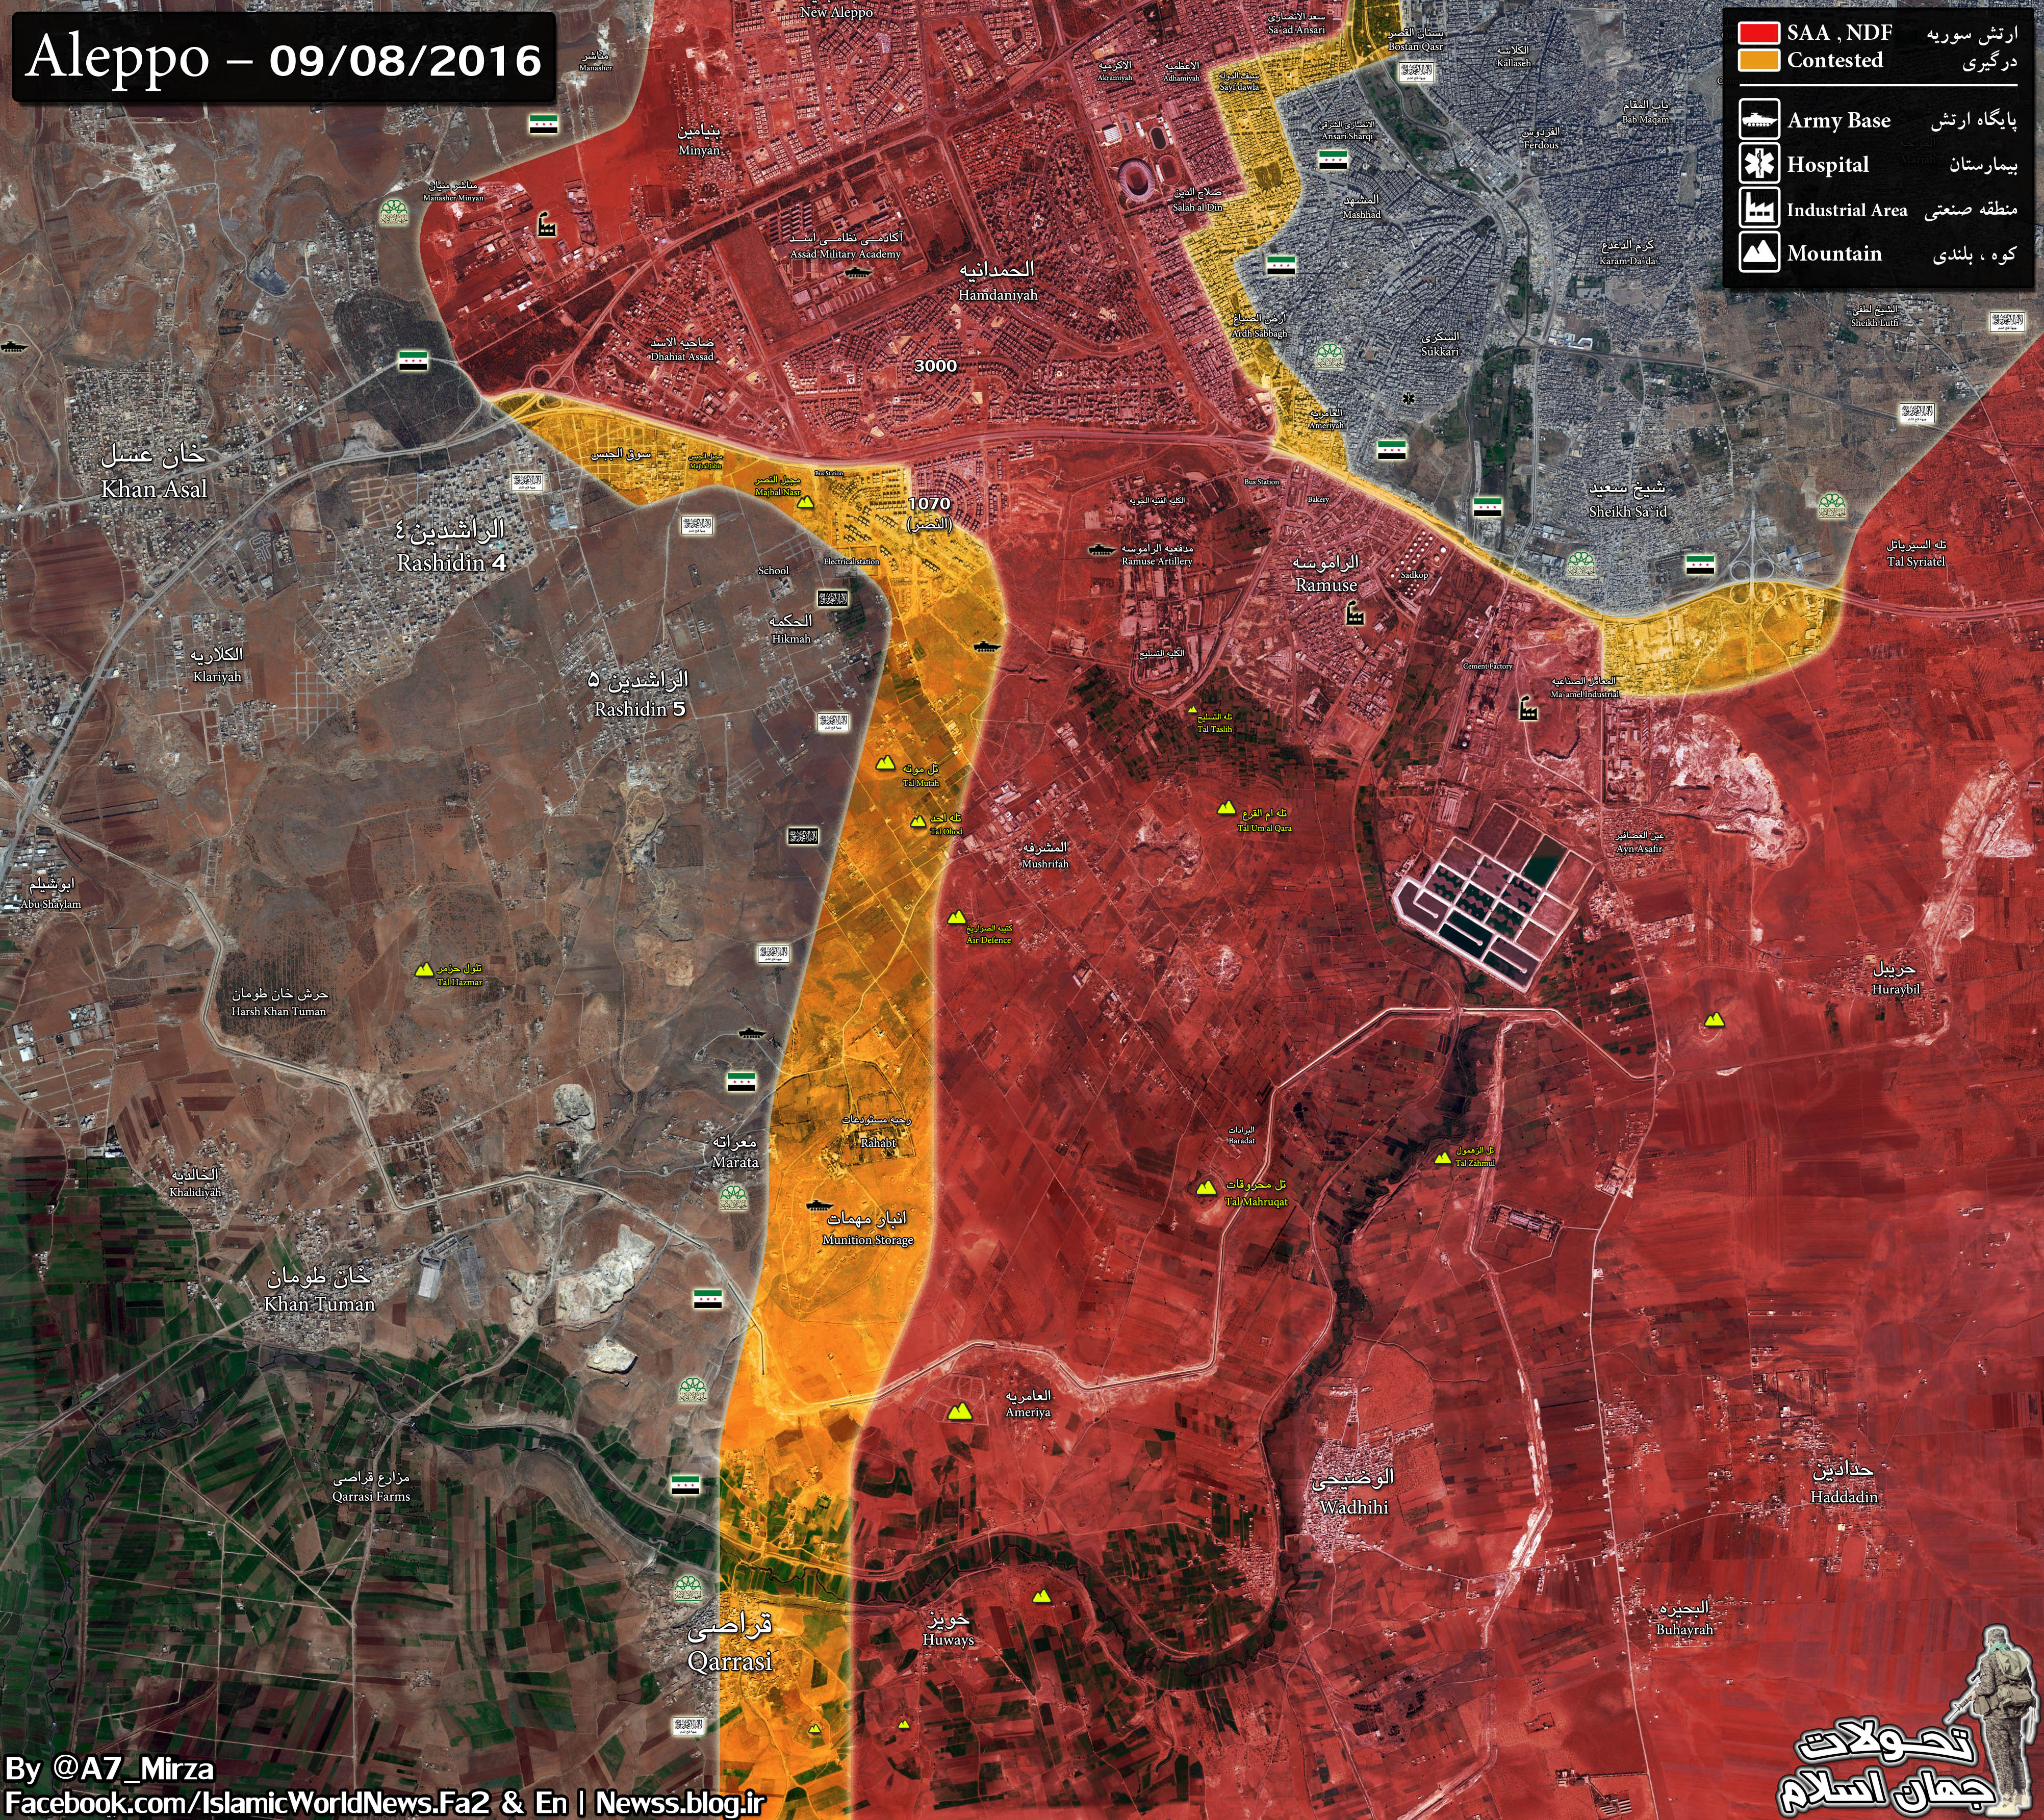 Overview of Battle for Aleppo City on September 9, 2016 (Maps, Photos)